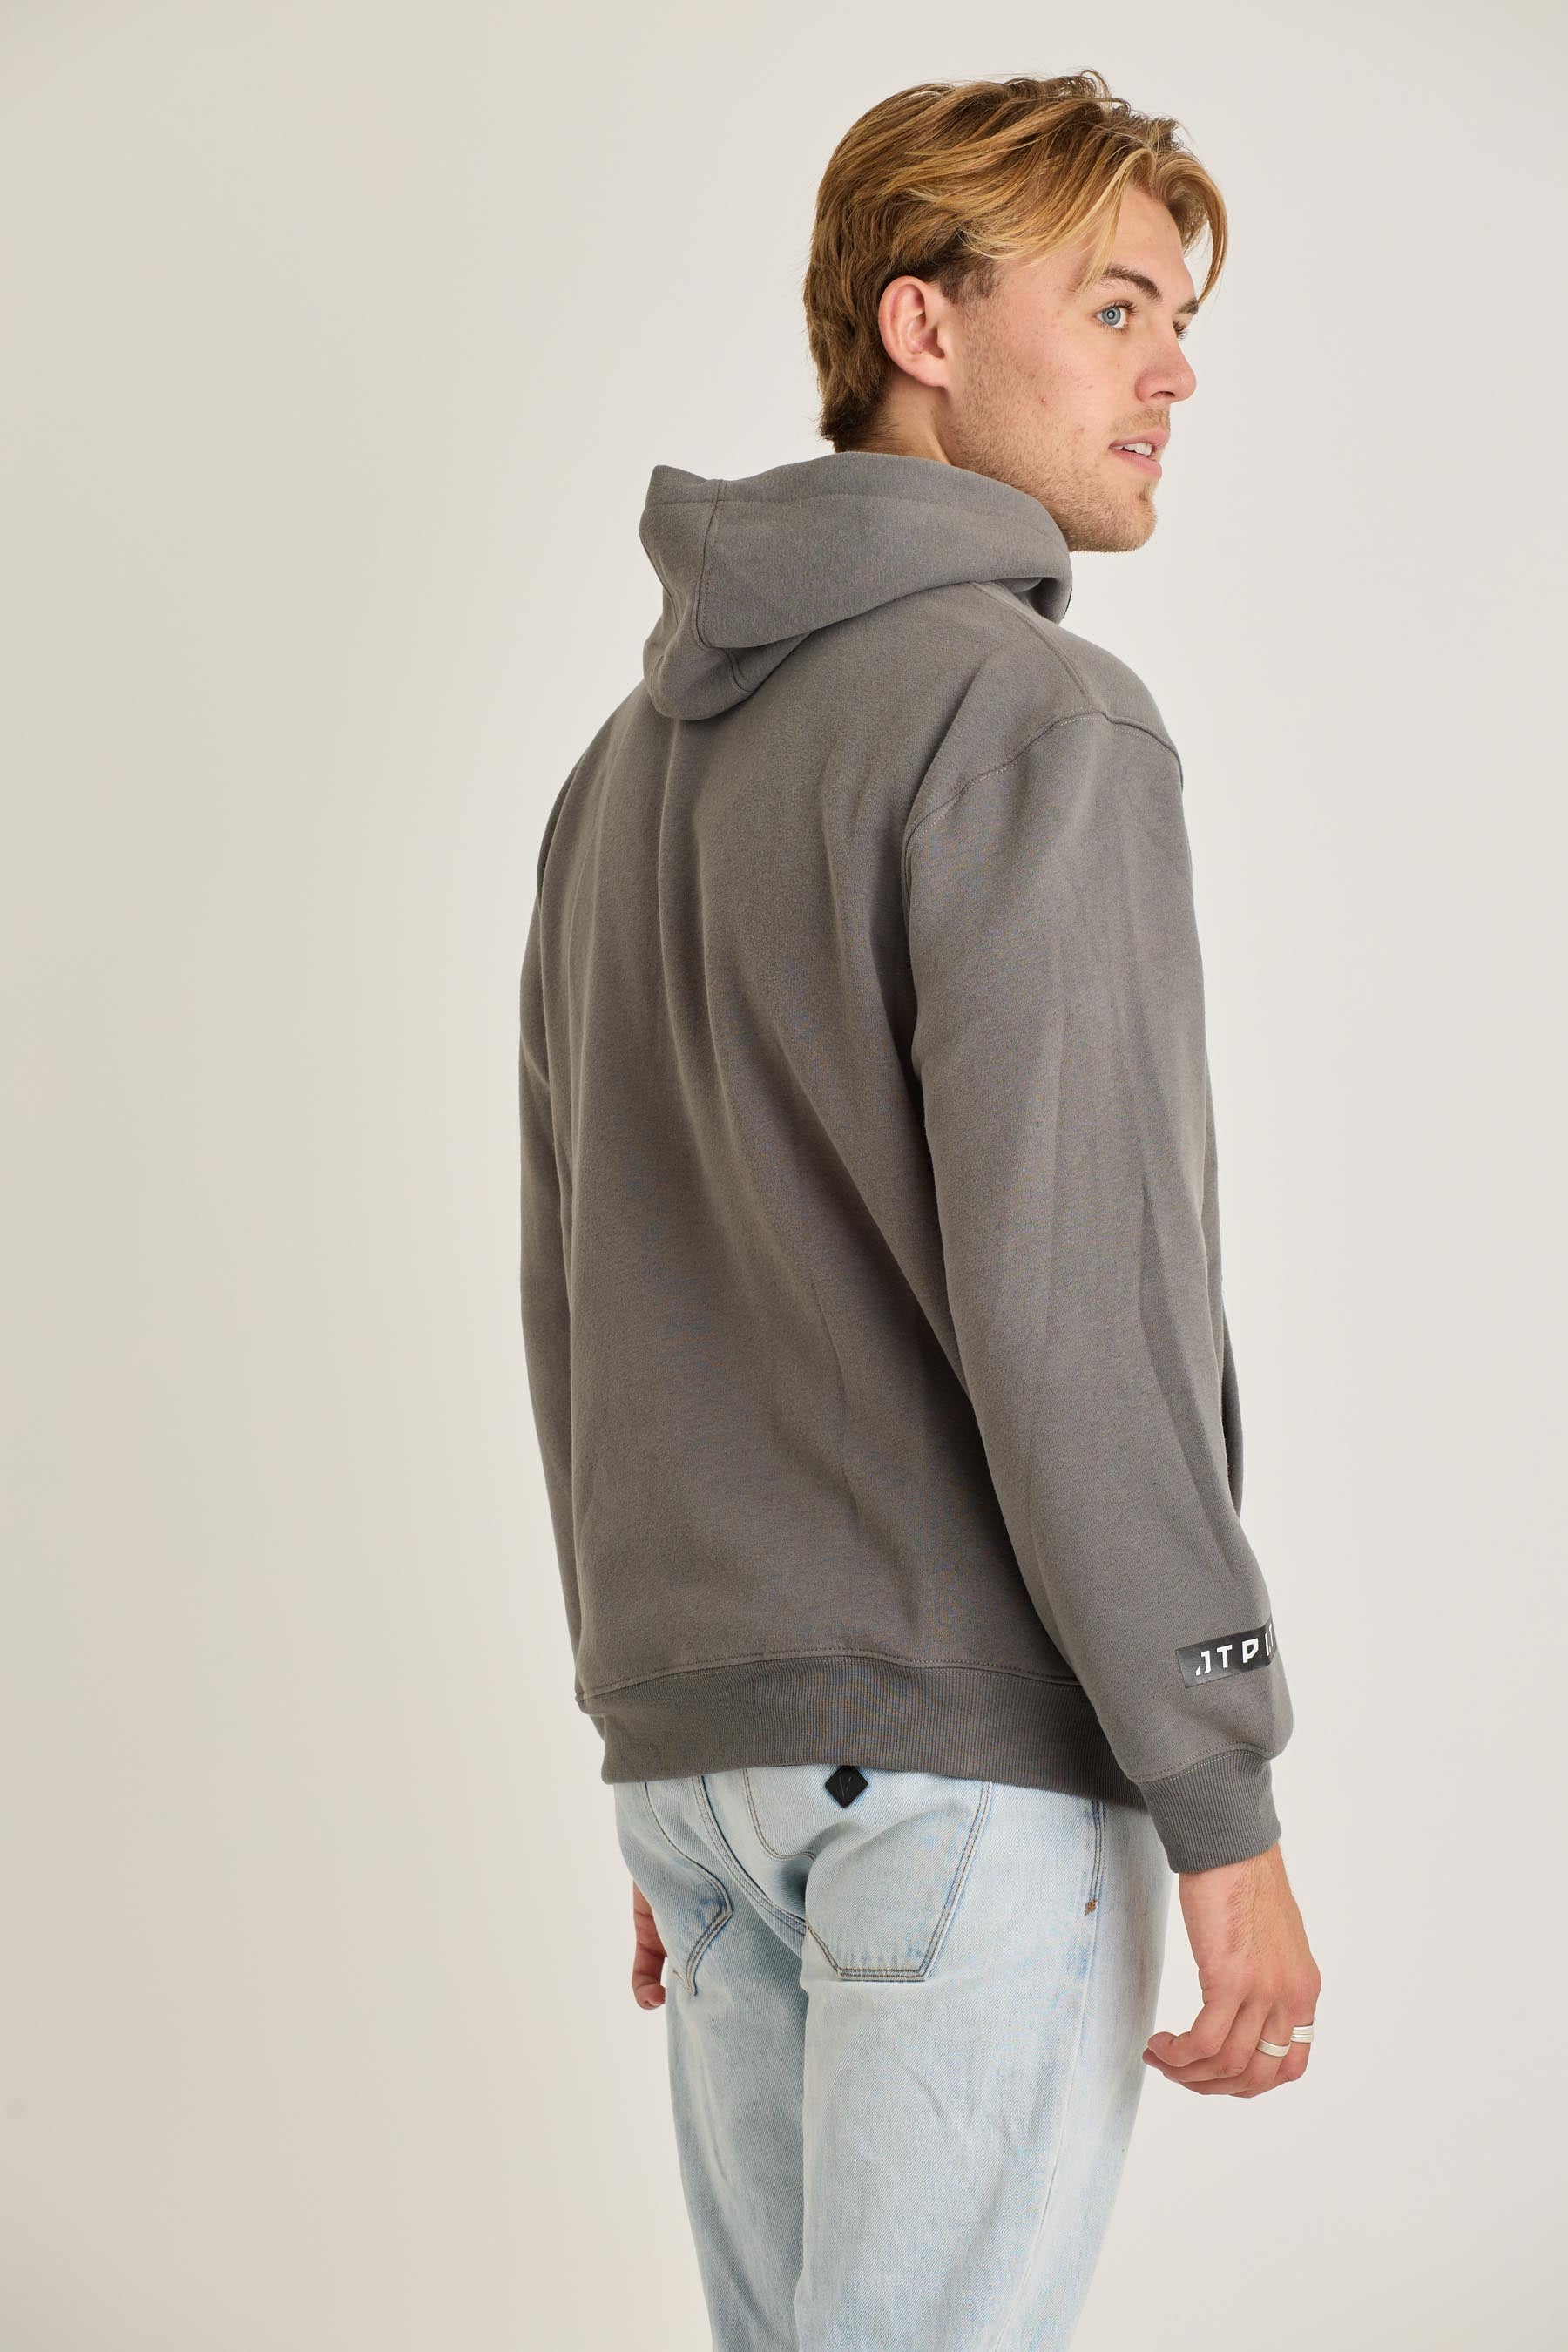 Jetpilot Corp Mens Pullover - Charcoal 6